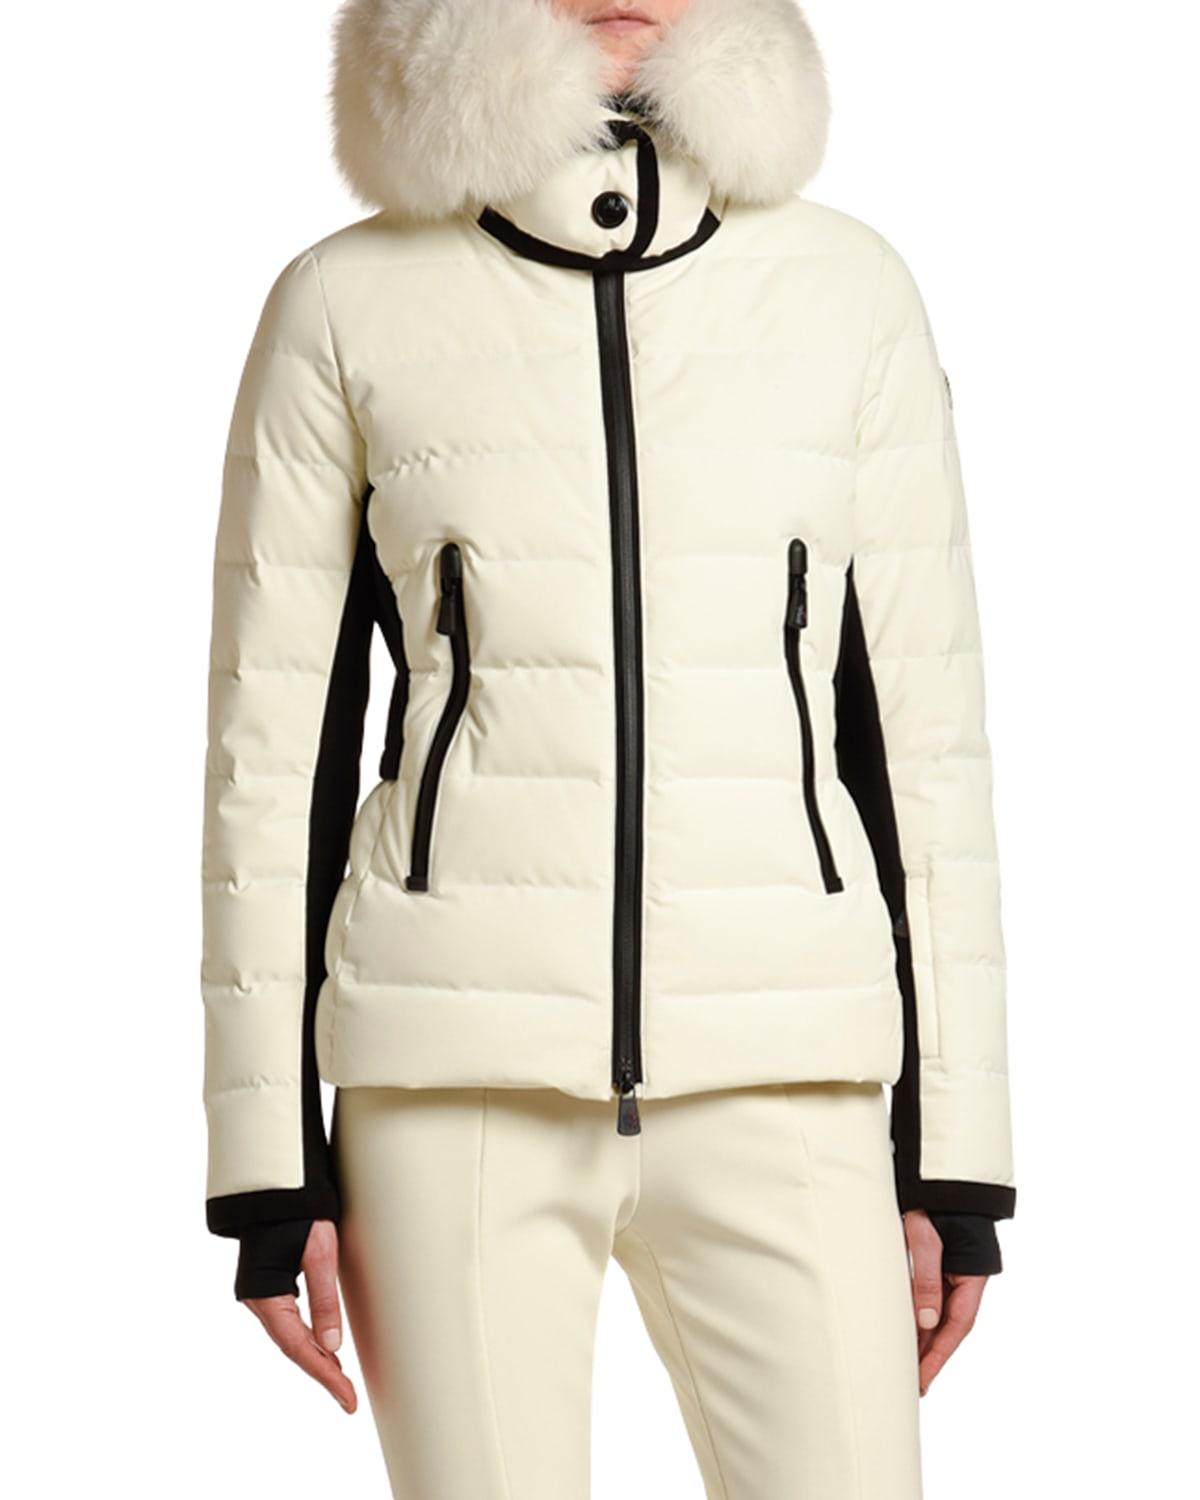 3 MONCLER GRENOBLE Fitted Down Fur Trim Lamoura Jacket in Natural | Lyst